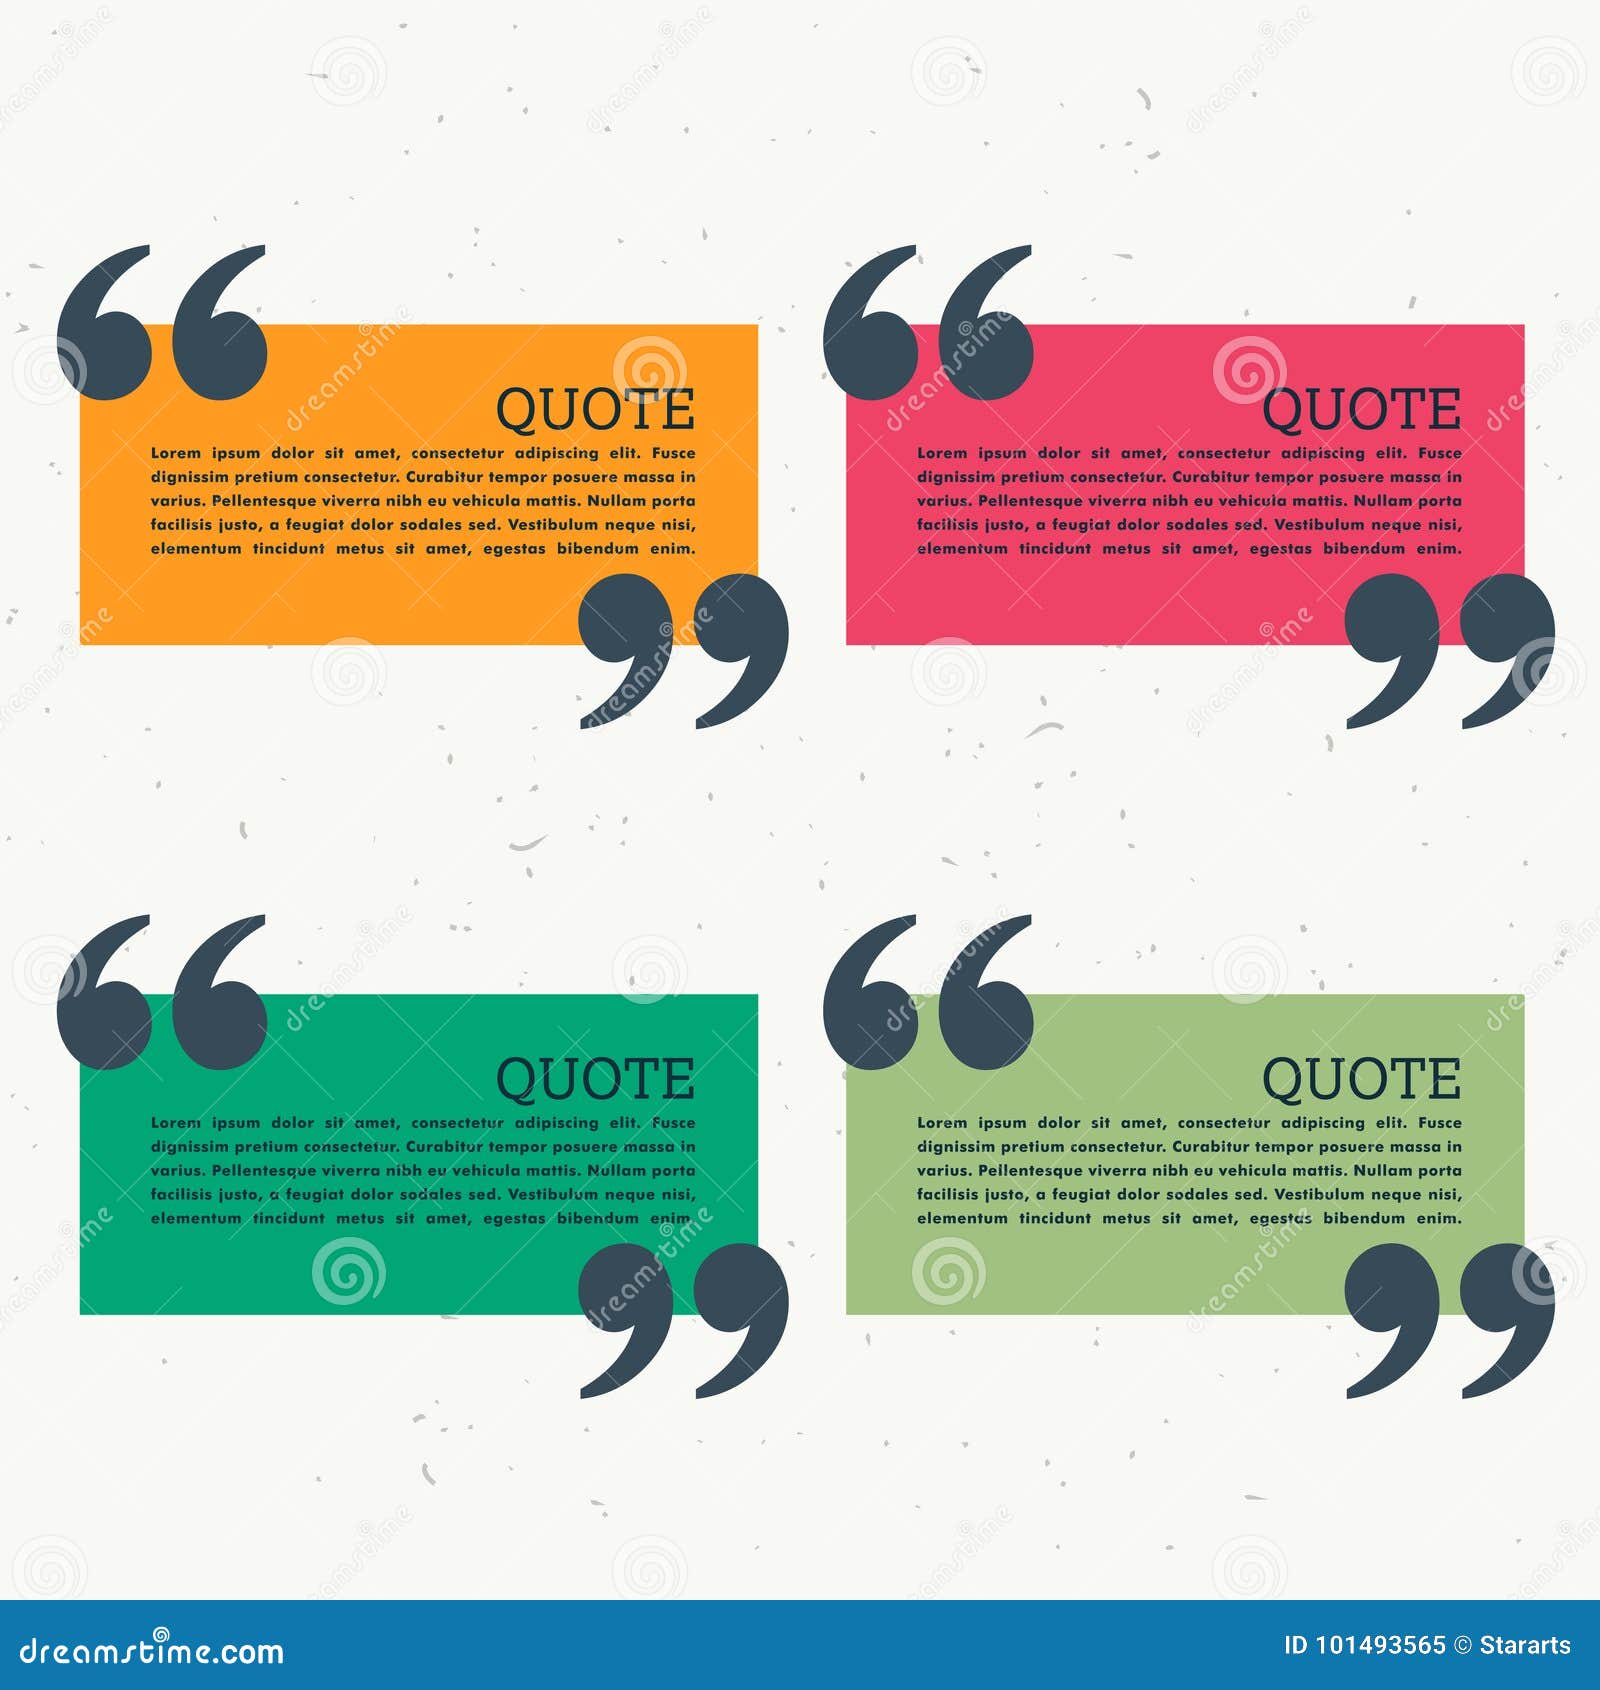 Colorful Set Of Four Quotation Marks Stock Vector Illustration Of Commas Colorful 101493565